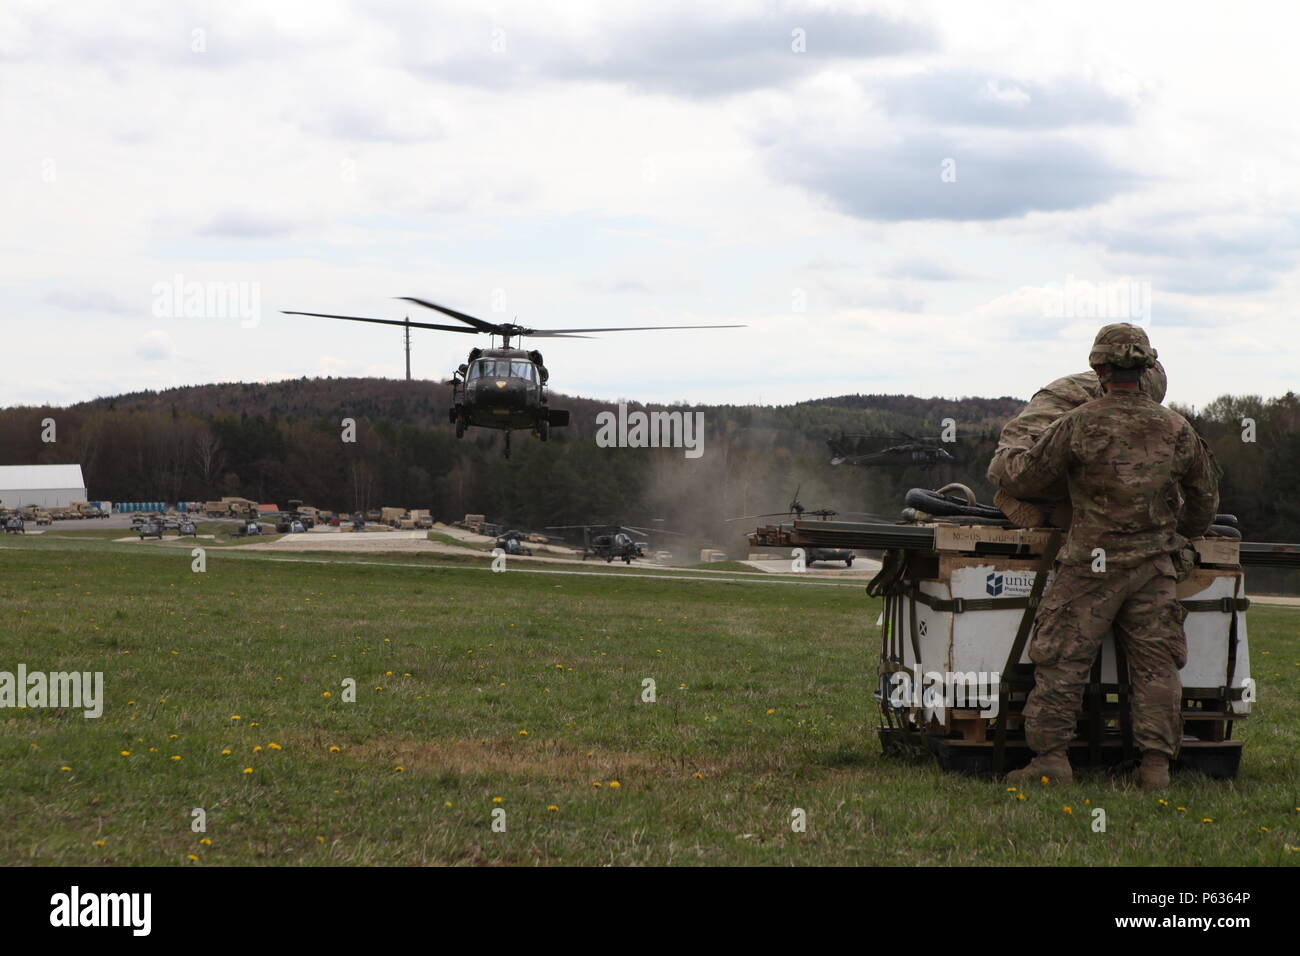 U.S. Soldiers of Charlie Company, 3rd Battalion, 227th Aviation Regiment 'Spearhead' prepare to conduct sling load operations with an UH-60 Black Hawk helicopter during exercise Saber Junction 16 at the U.S. Army’s Joint Multinational Readiness Center (JMRC) in Hohenfels, Germany, April 13, 2016. Saber Junction 16 is the U.S. Army Europe’s 173rd Airborne Brigade’s combat training center certification exercise, taking place at the JMRC in Hohenfels, Germany, Mar. 31-Apr. 24, 2016.  The exercise is designed to evaluate the readiness of the Army’s Europe-based combat brigades to conduct unified l Stock Photo